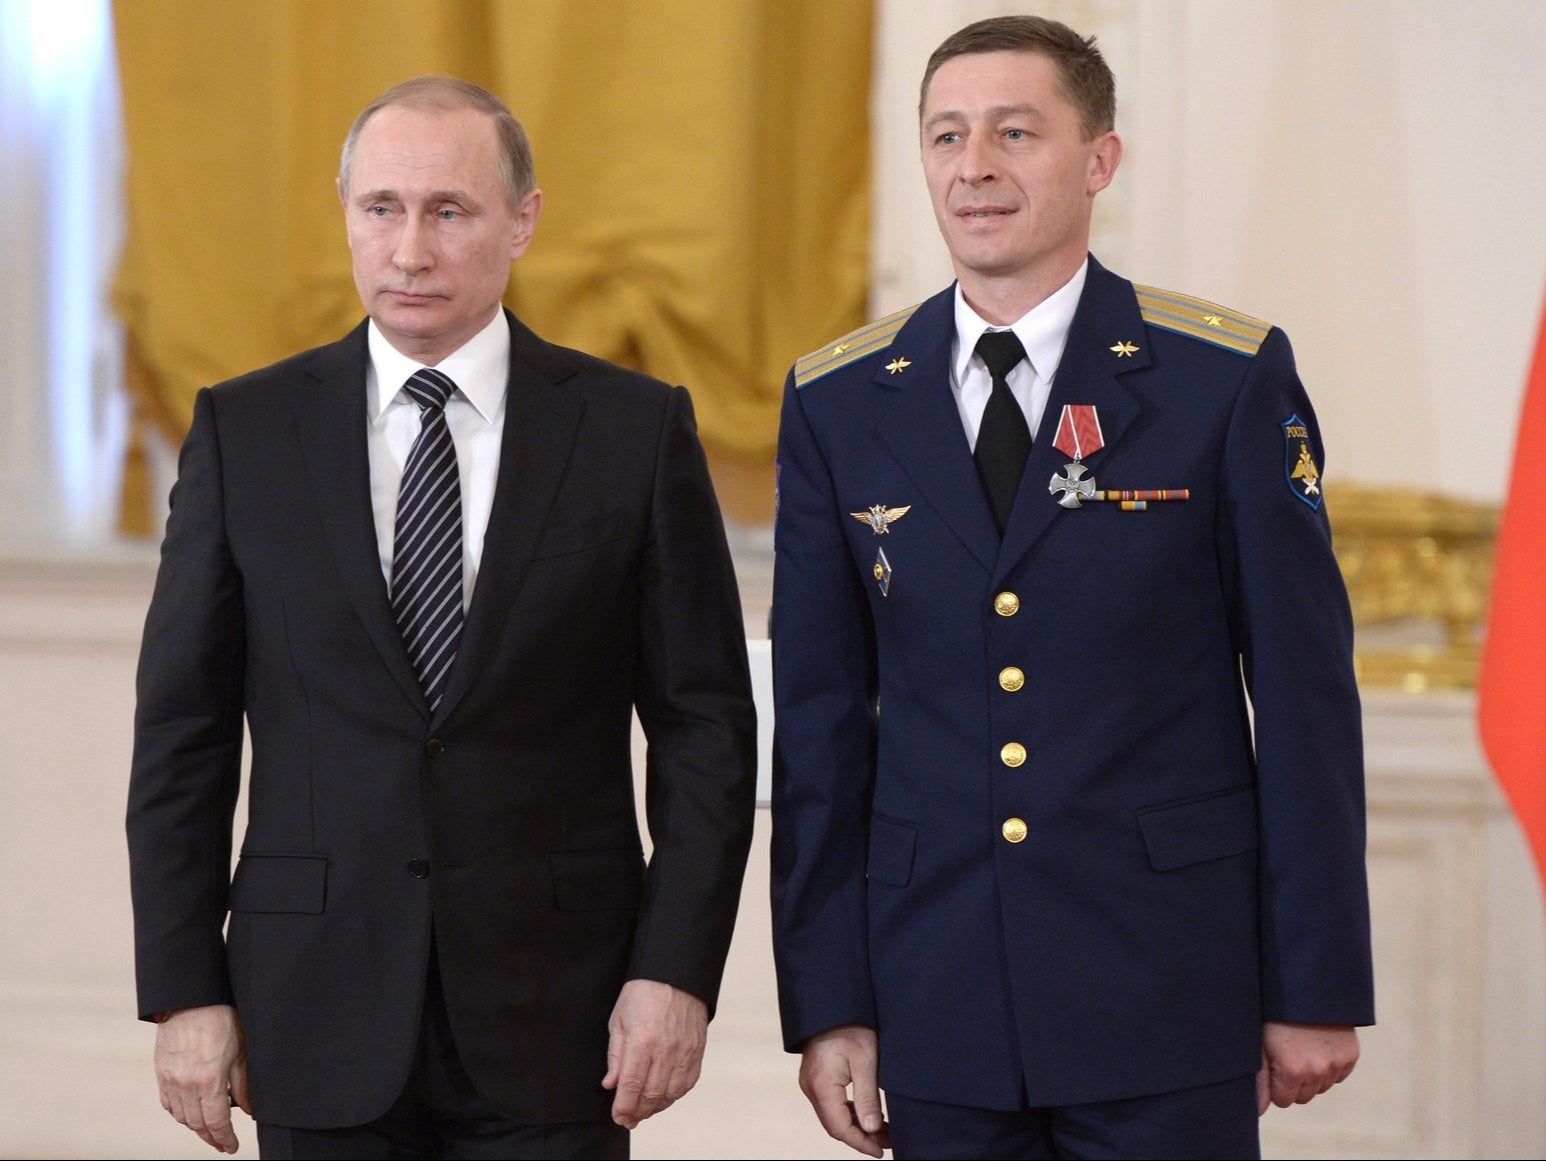 Andrei Zakharov awarded the Order of Courage by Vladimir Putin in 2016